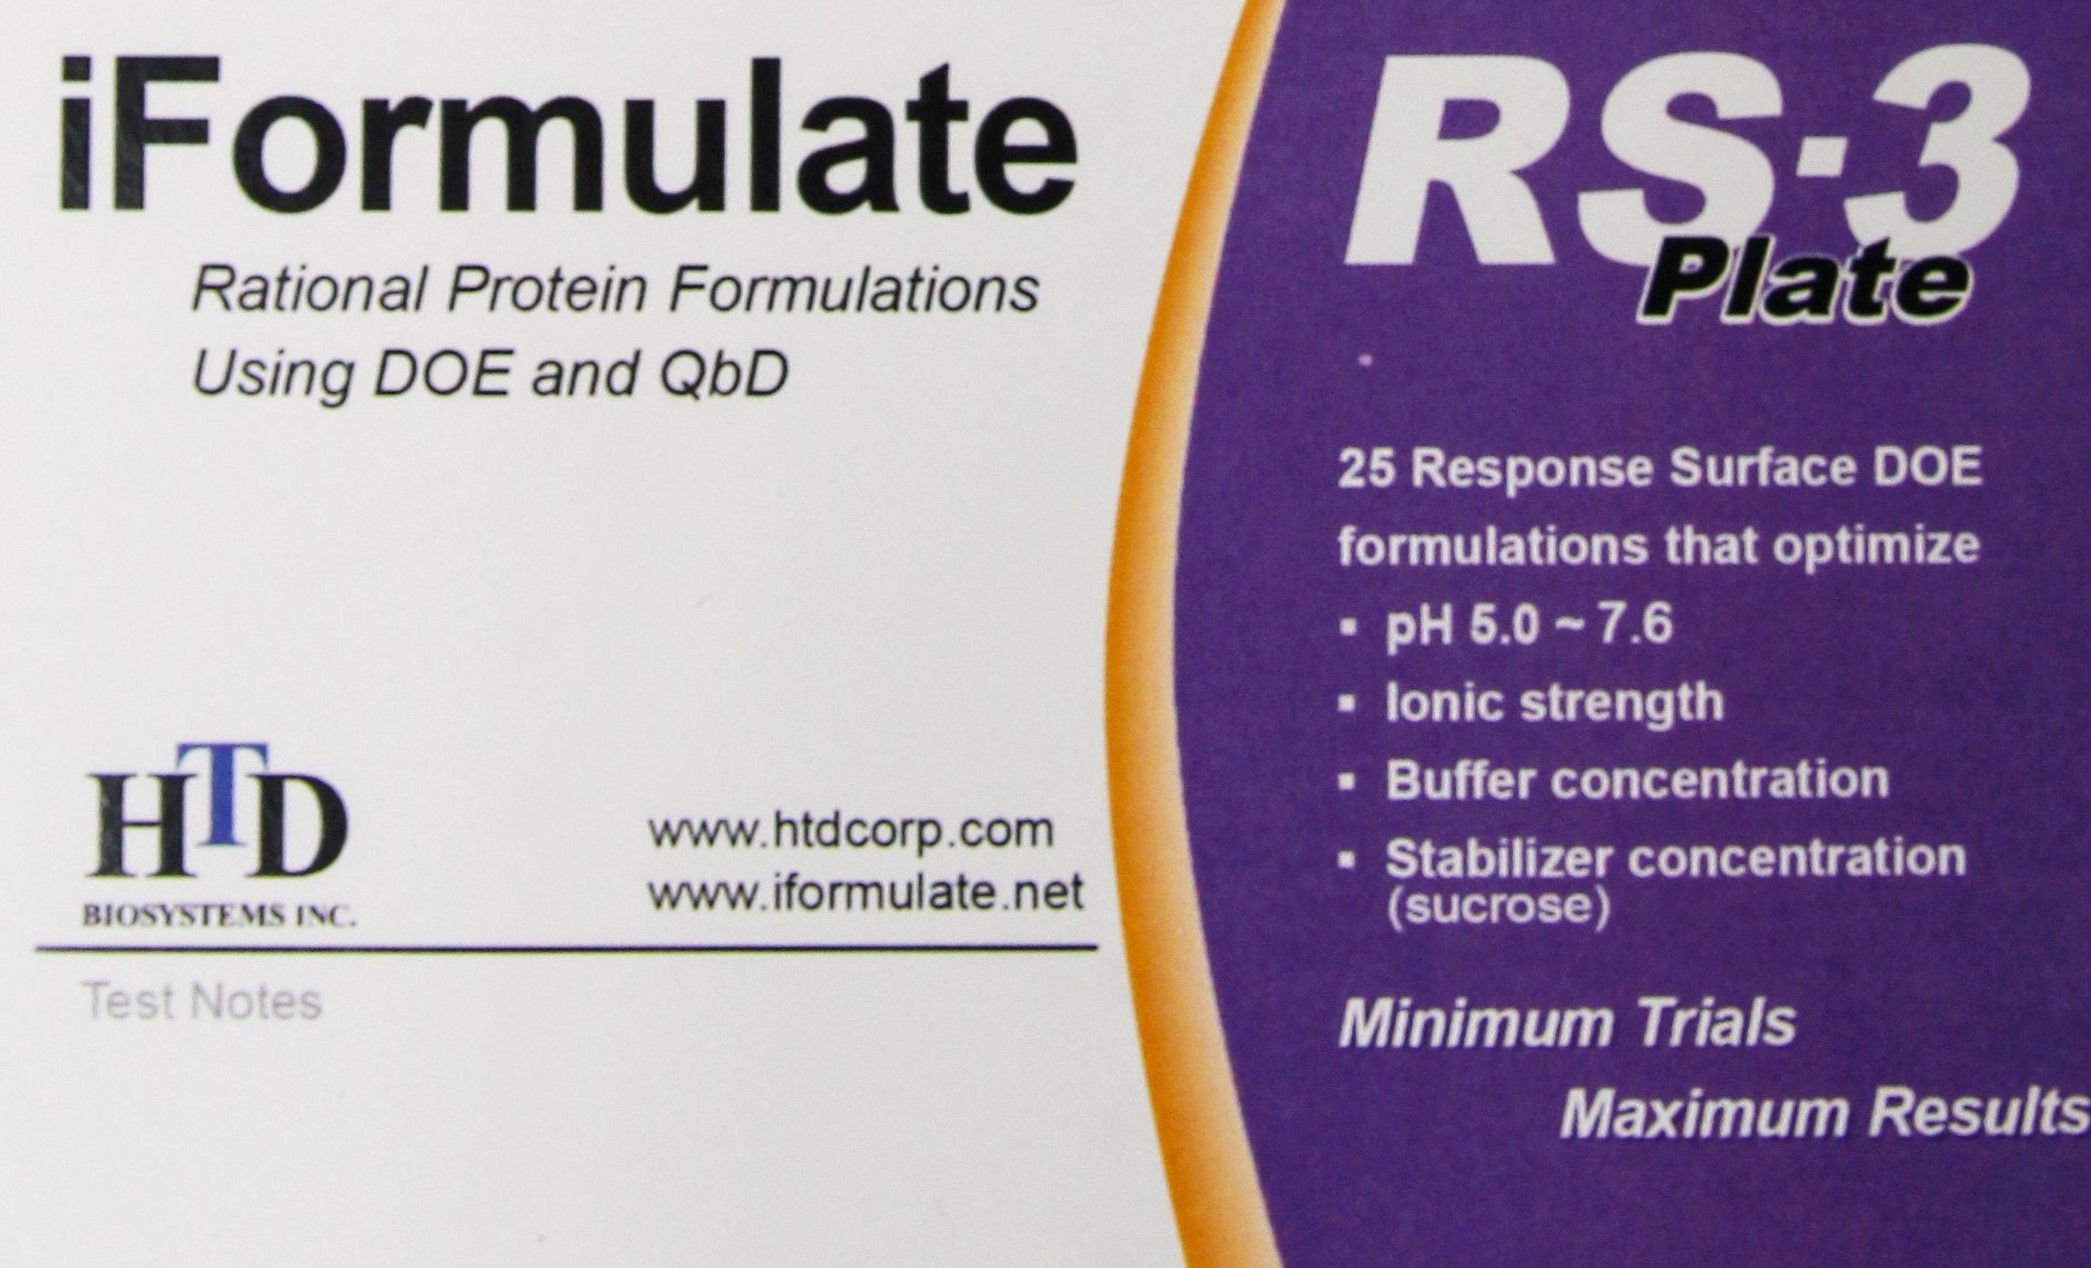 iFormulate RS-3 Plate